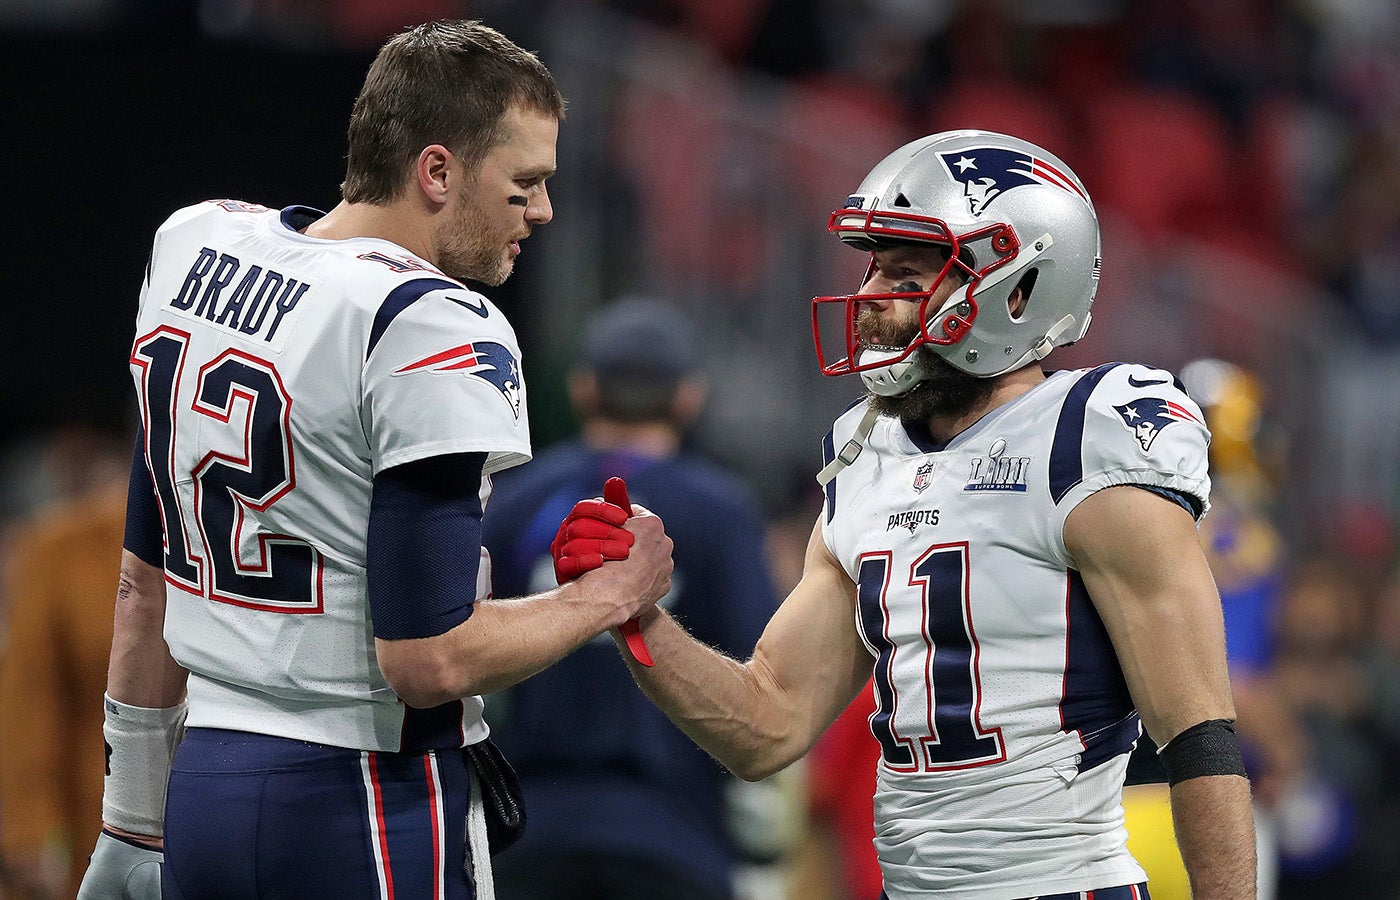 The 10 players and coaches who had the biggest impact on Tom Brady